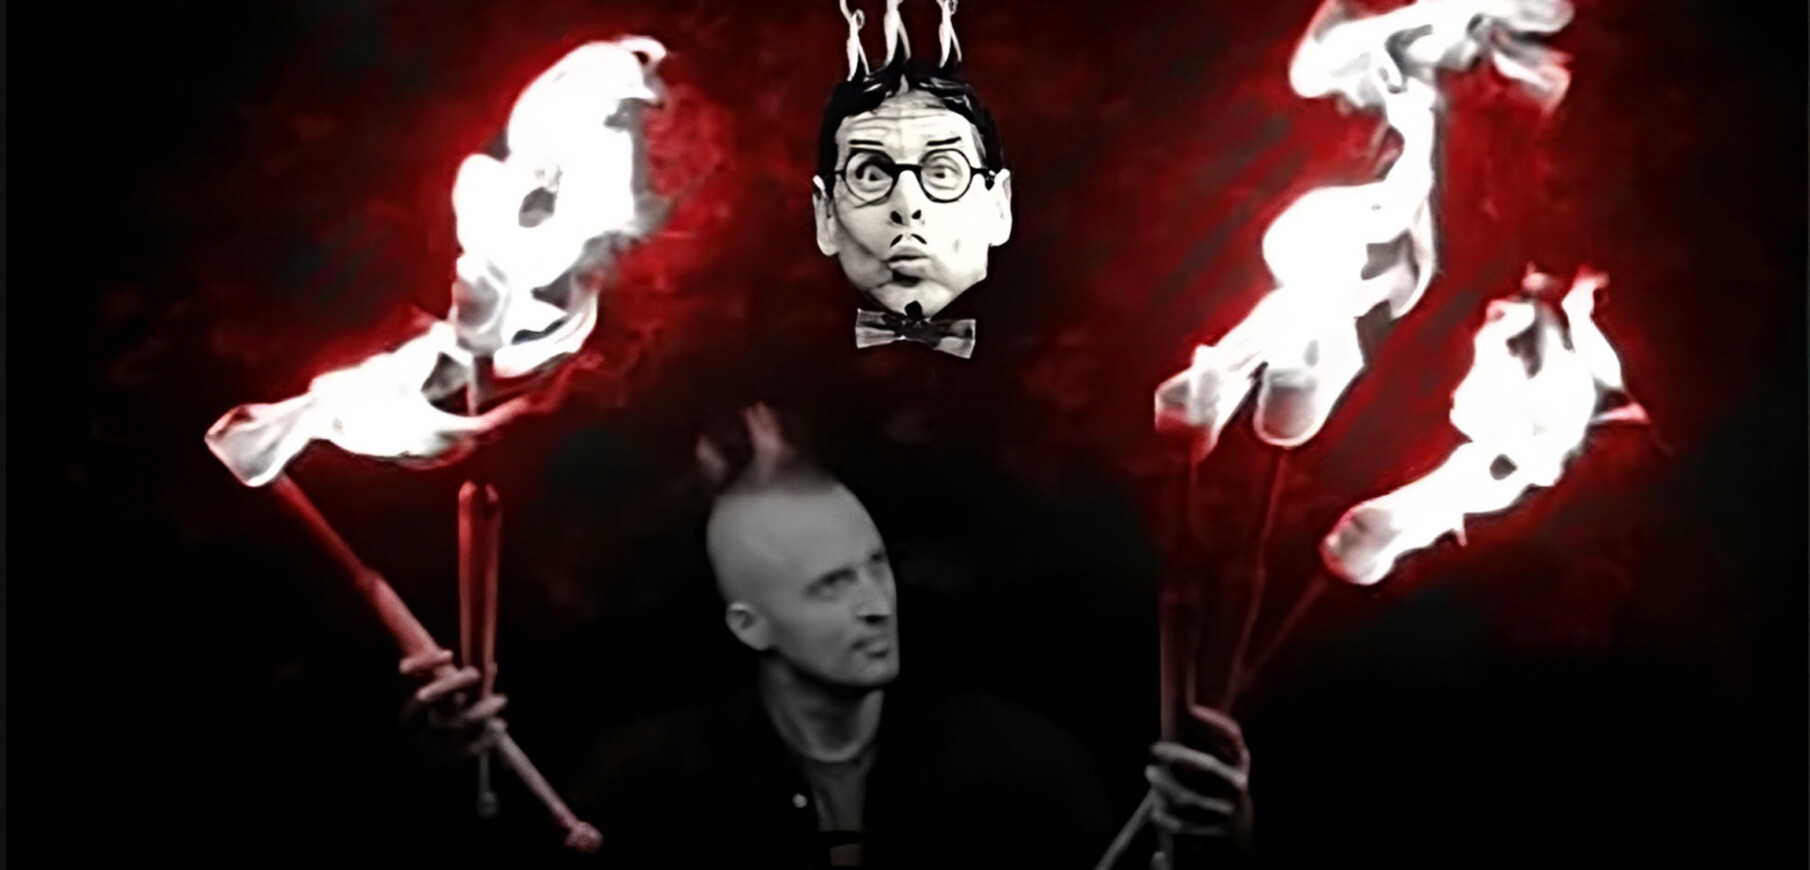 The faces of two light skinned men hover against a dark backdrop. One appears t have glasses and a moustaches drawn on with marker. Hands holding flaming batons frame them.